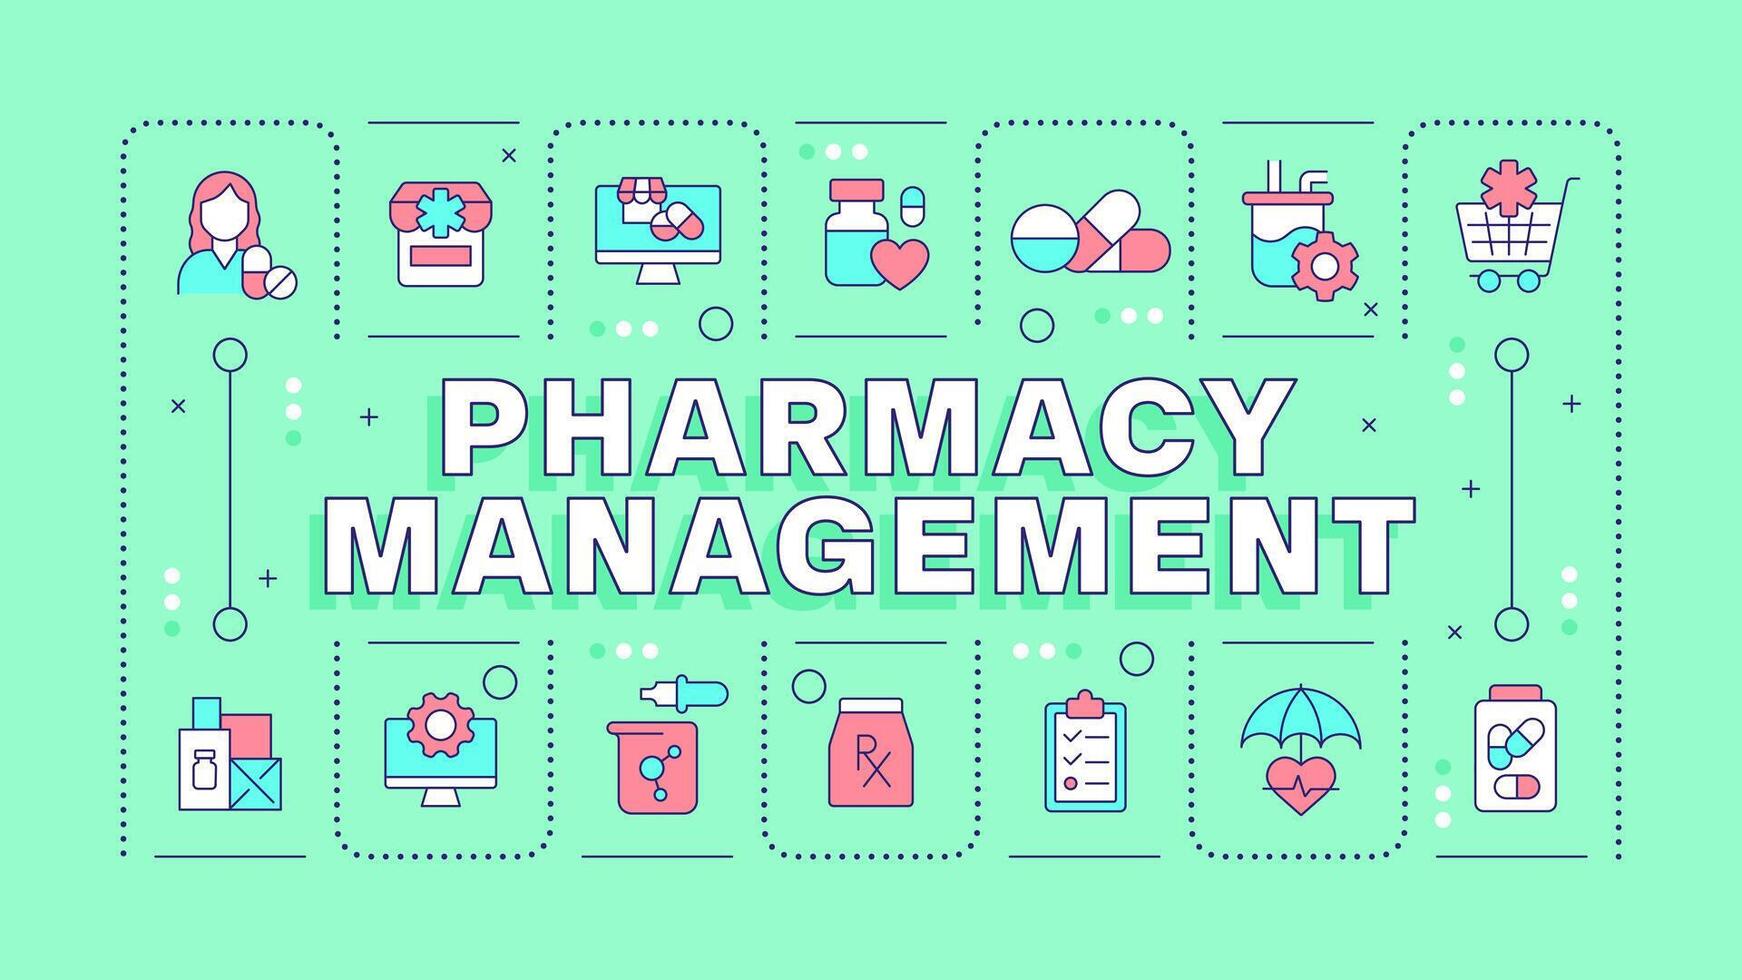 Pharmacy management green word concept. Pharmaceutical products. Patient support services. Typography banner. Illustration with title text, editable icons color vector